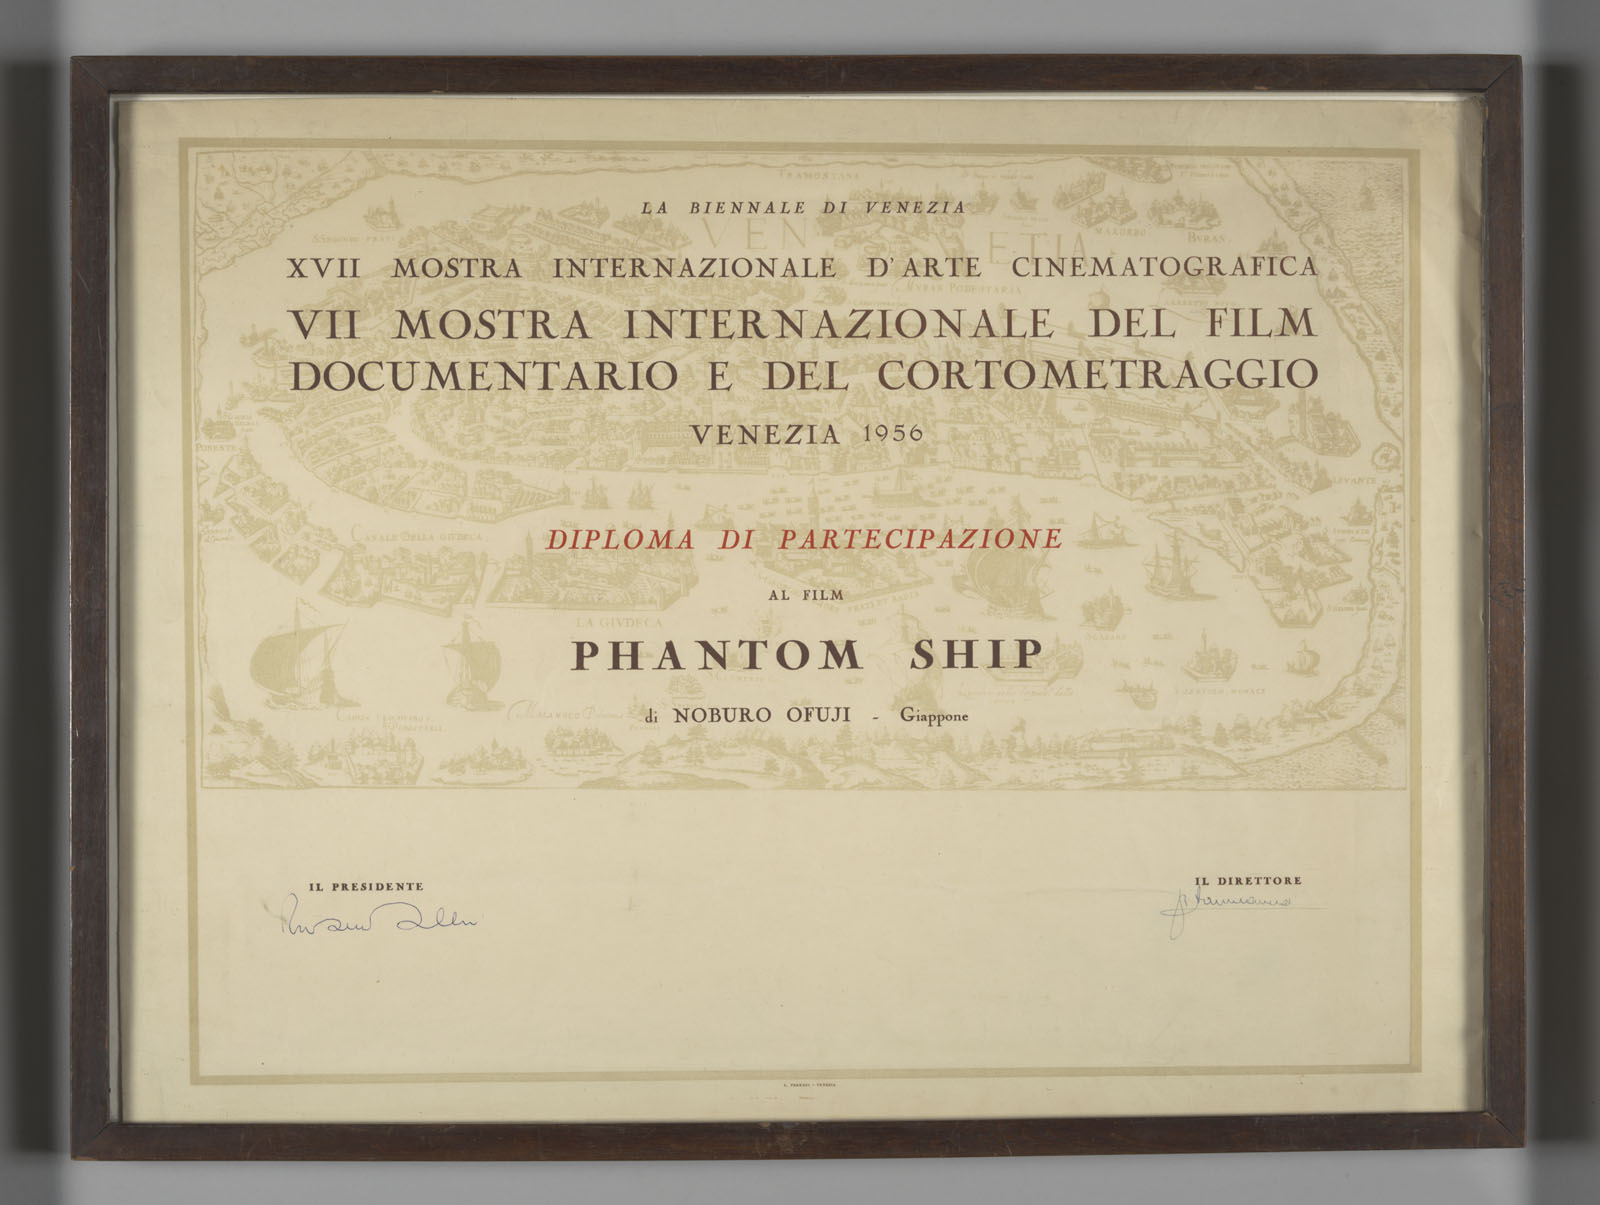 Certificateof submission to the Venice International Documentary and Short Film Festival (1956)